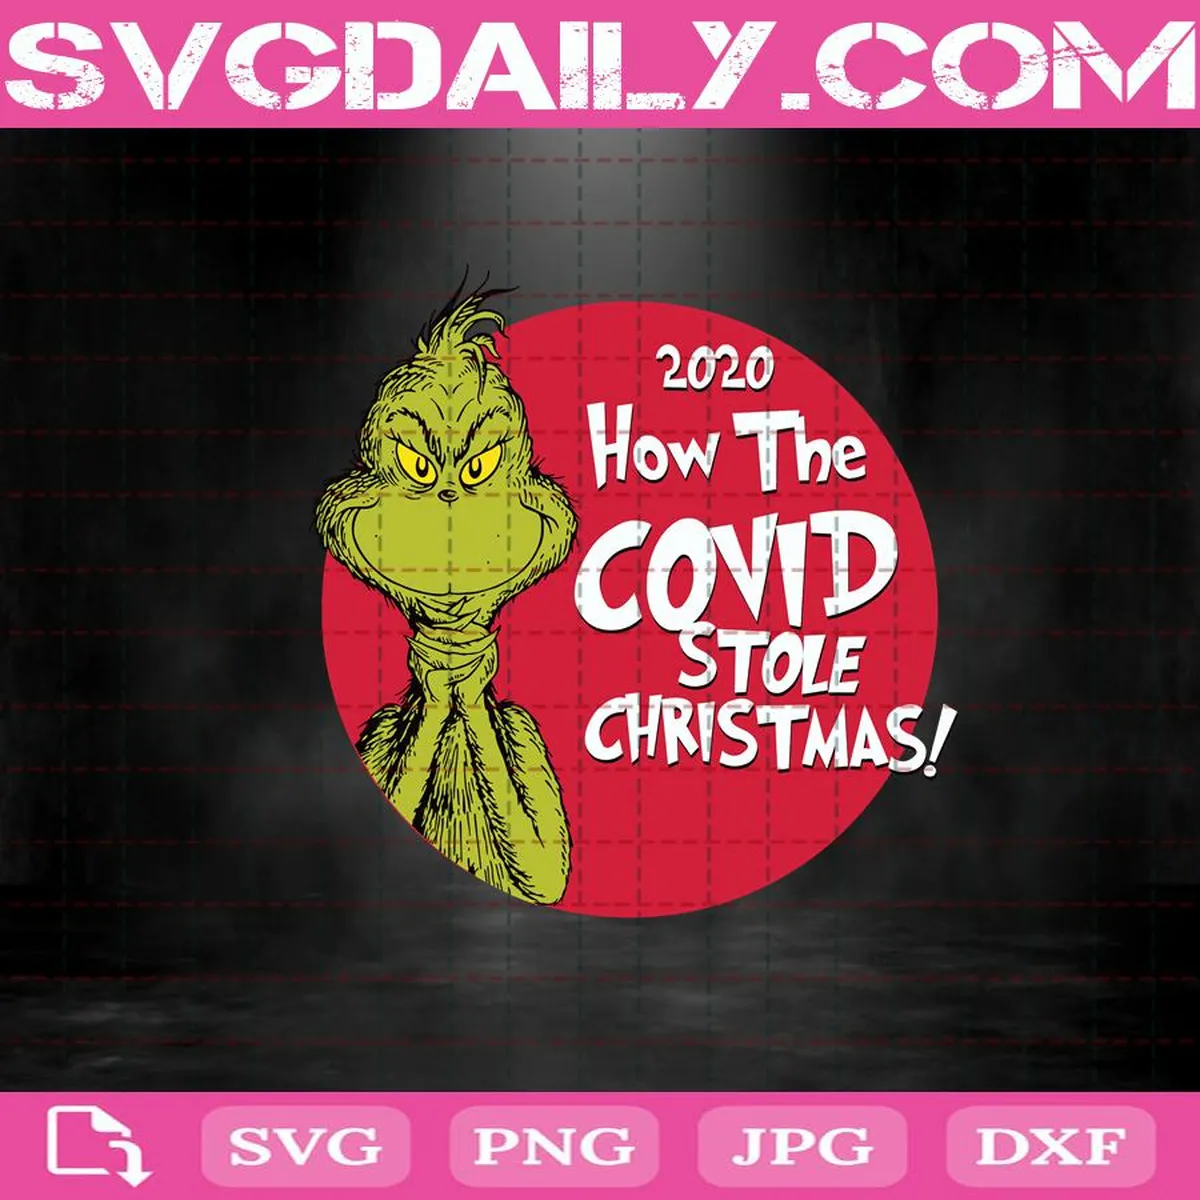 Grinch 2020 How The Covid Stole Christmas Svg, The Grinch Stoles Christmas Svg, Grinch Svg, Christmas Svg